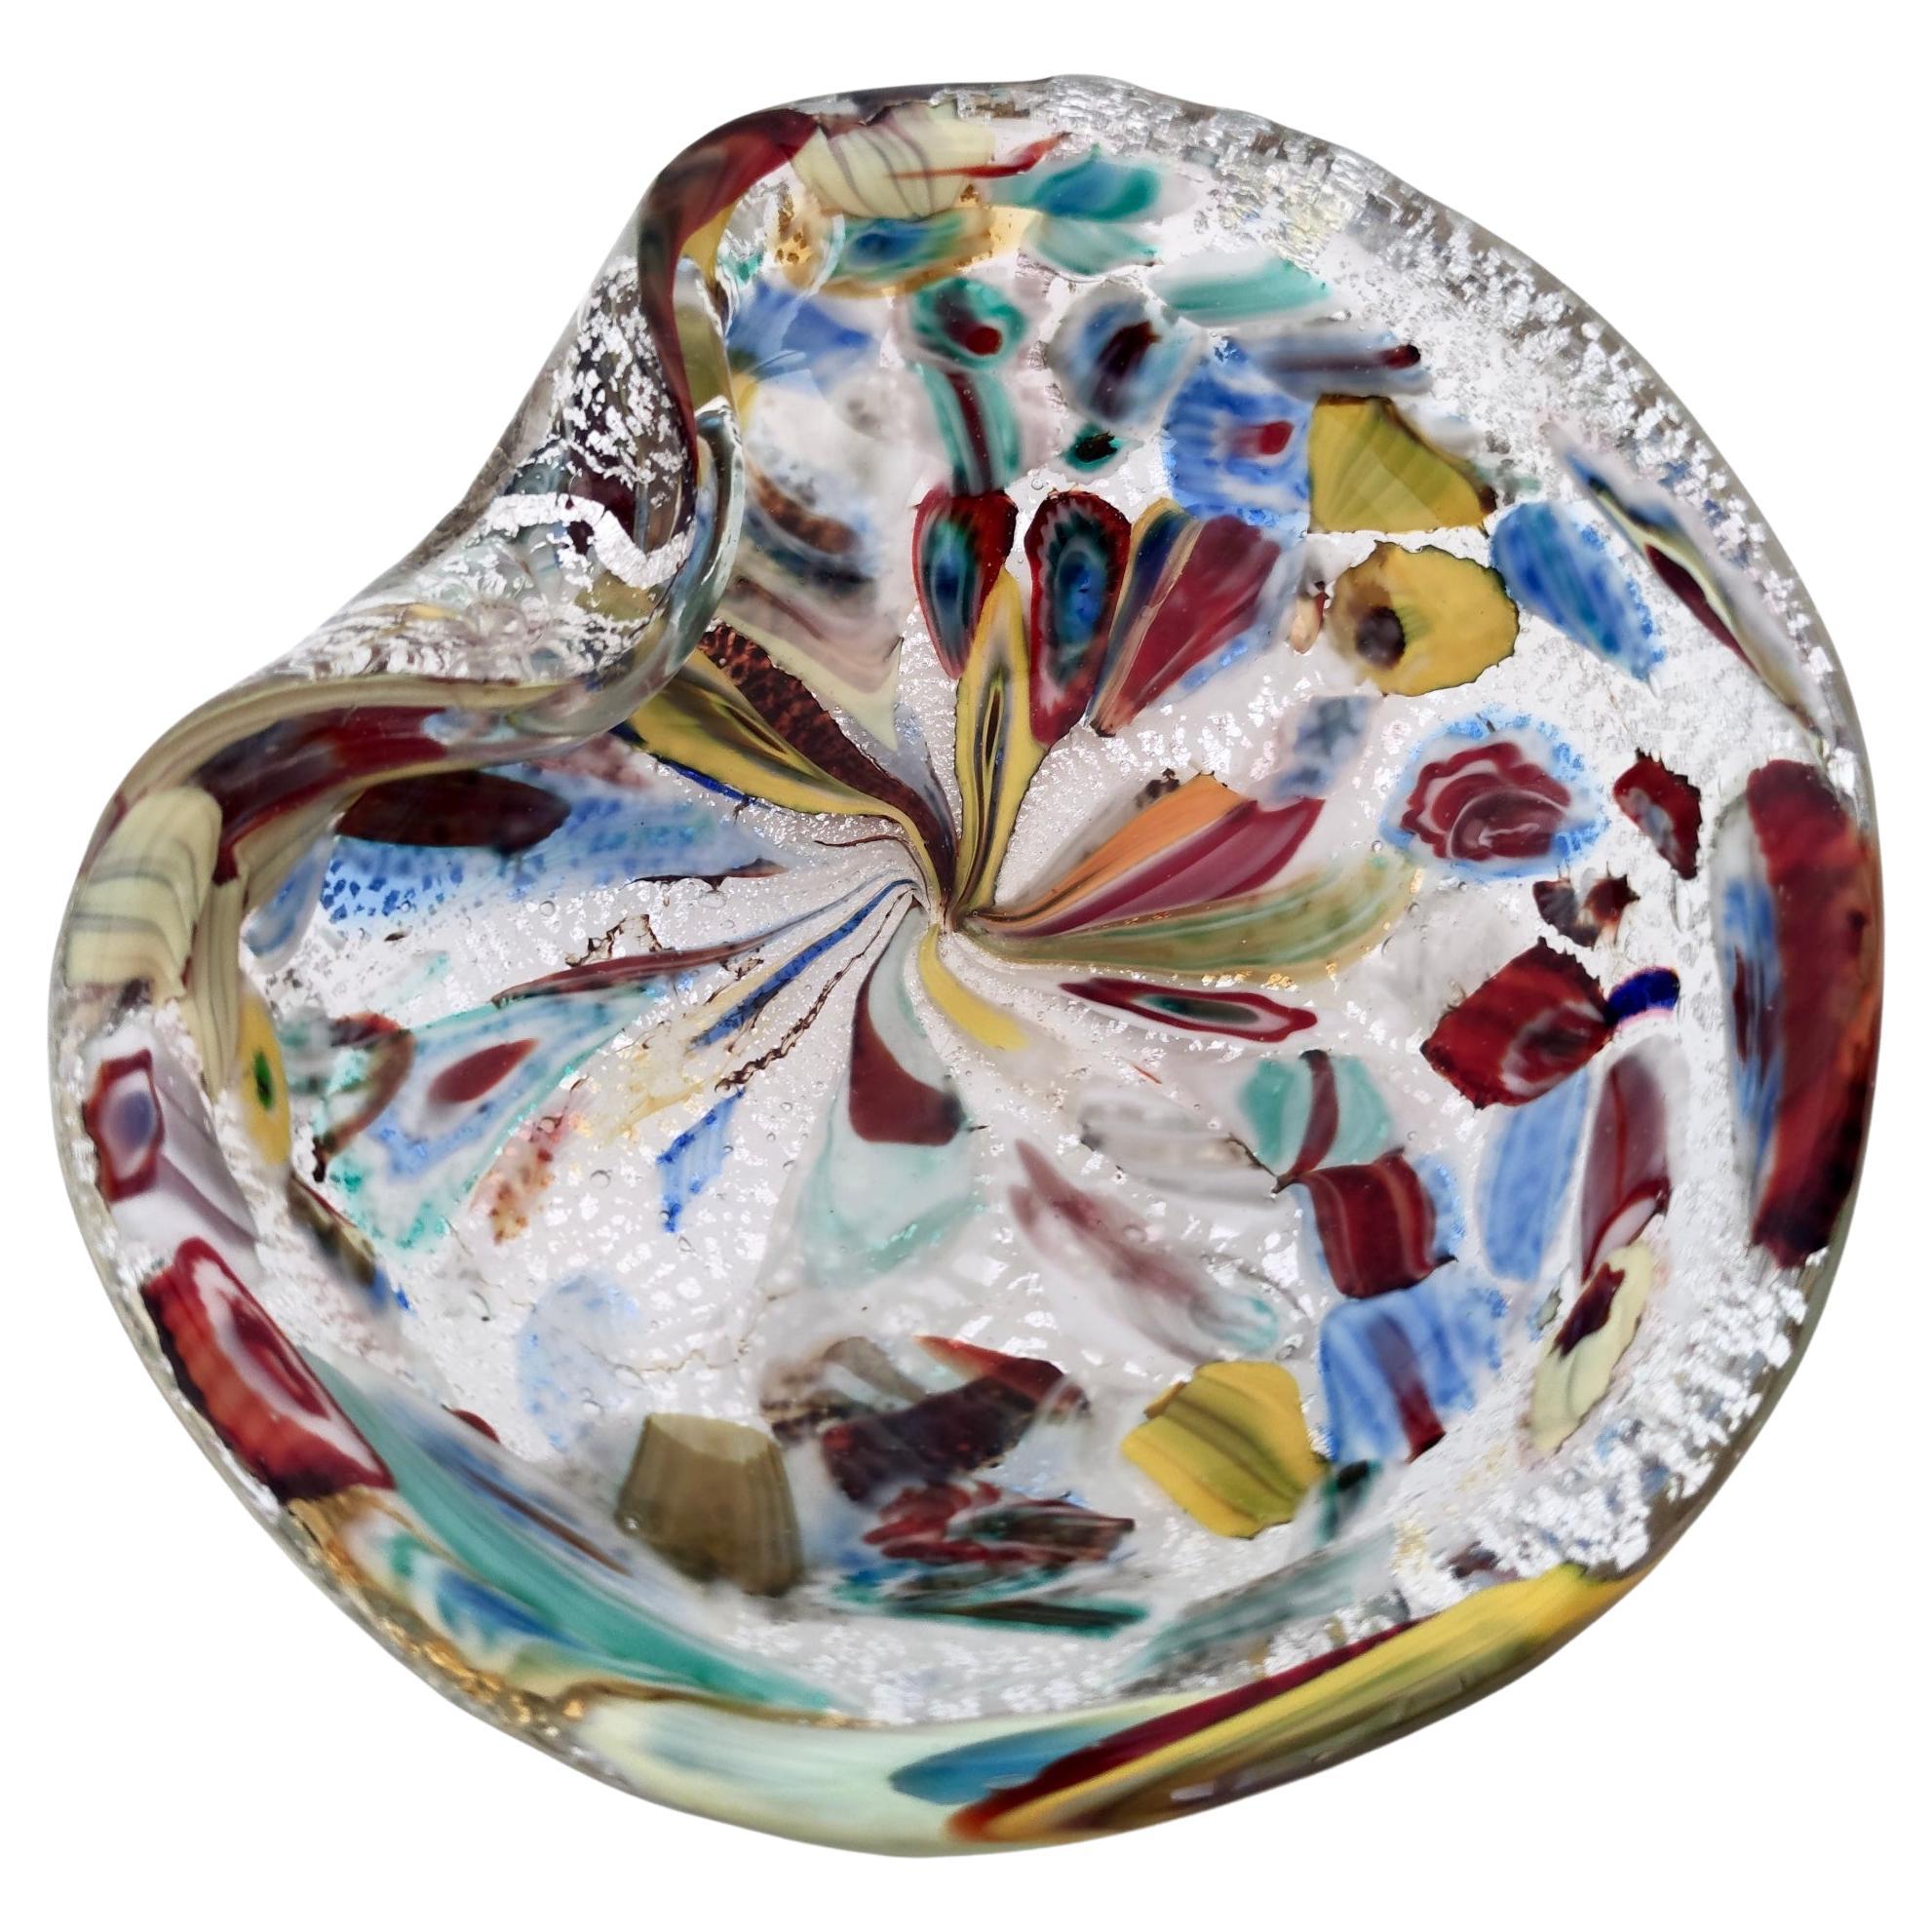 Murano Glass Bowls and Baskets